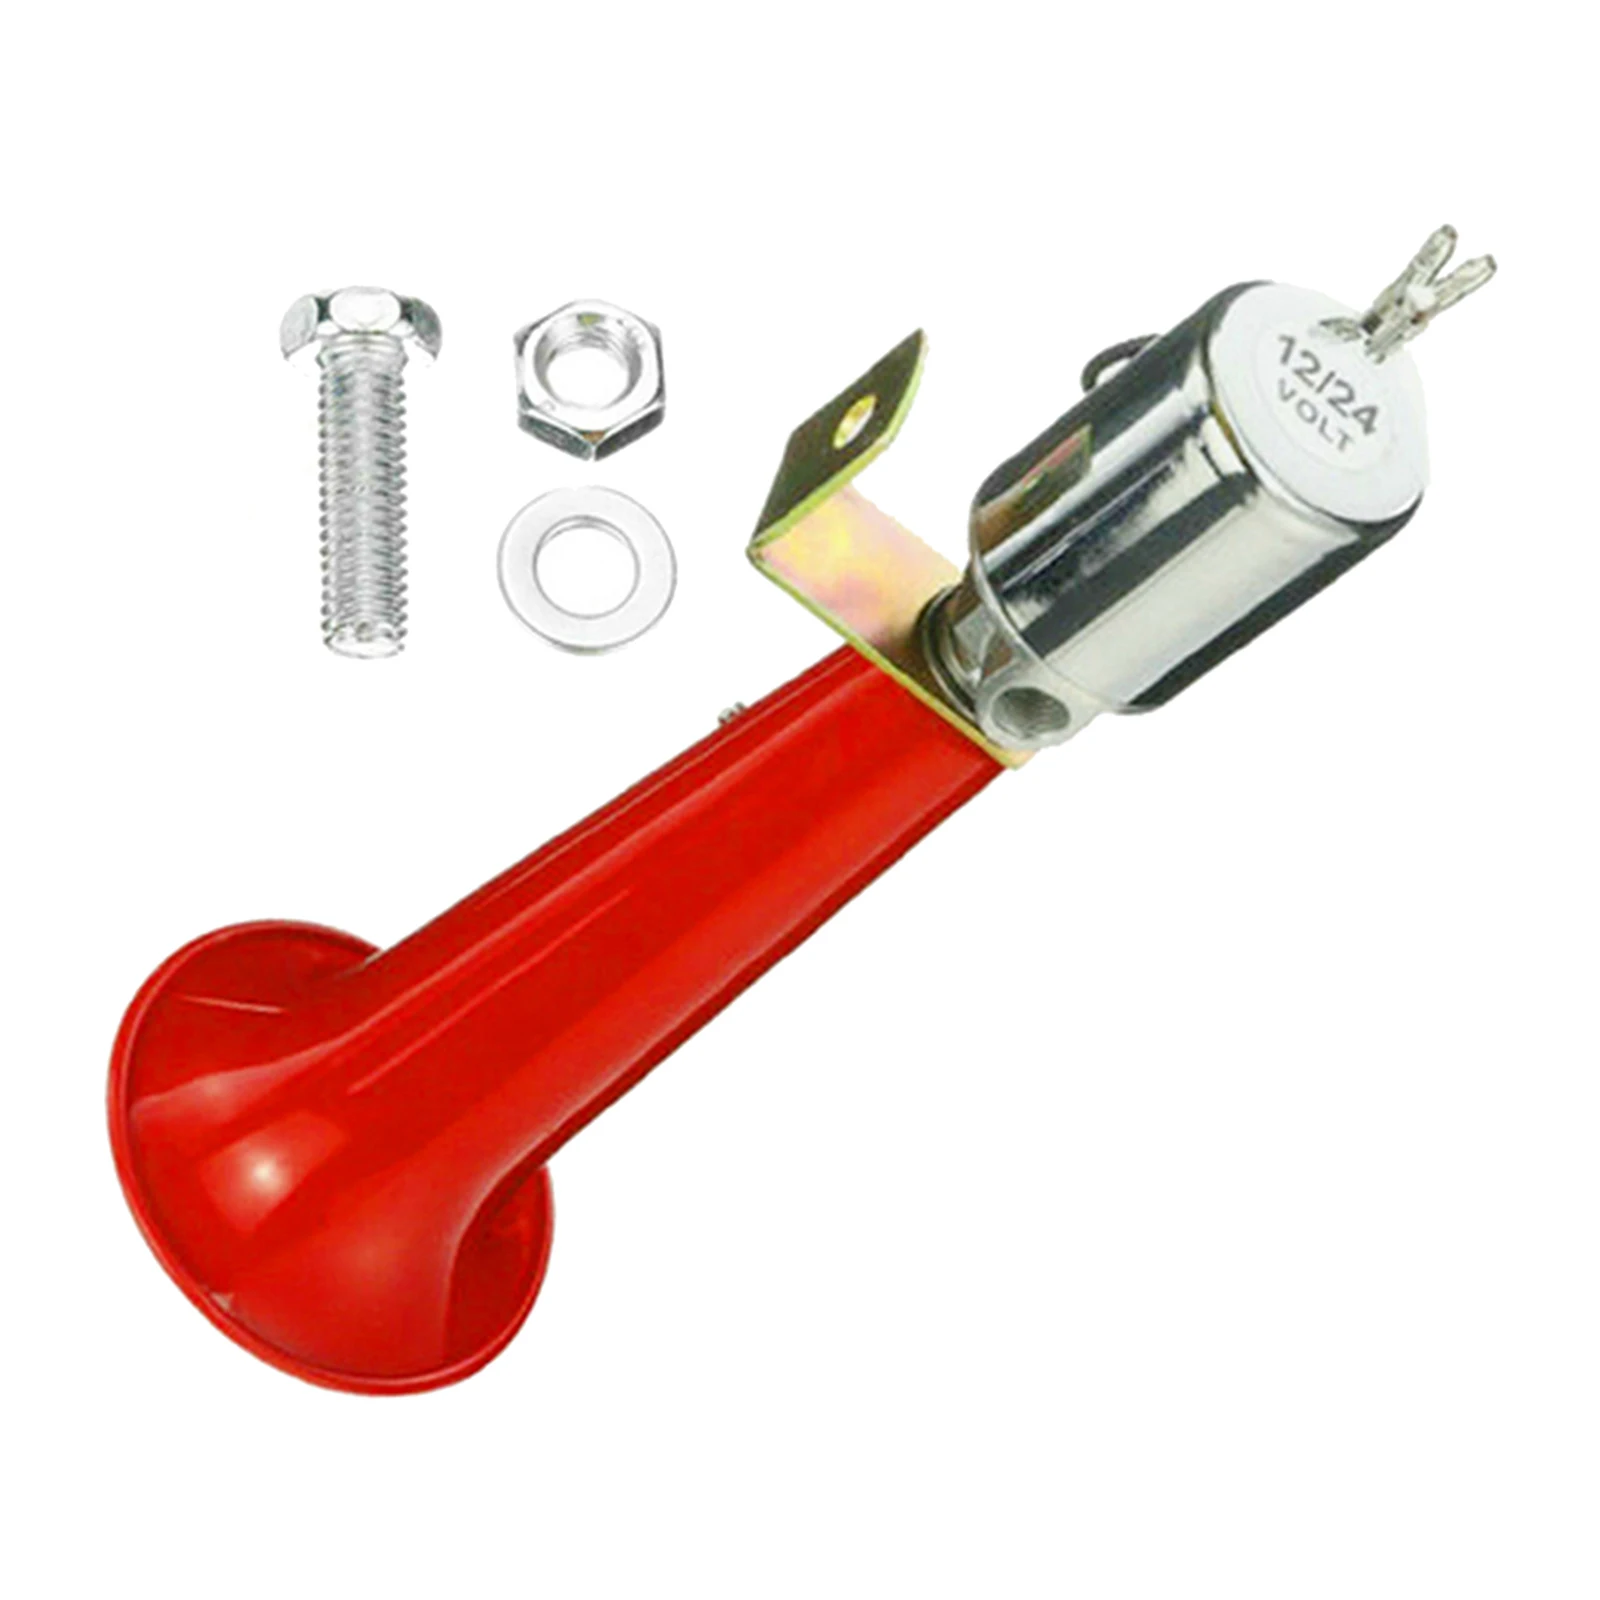 Super Loud 12/24V 180db Air Horn 10 Inches Single Trumpet Truck Air Horn for Any 12V / 24 V Vehicles Lorrys Trains Cars